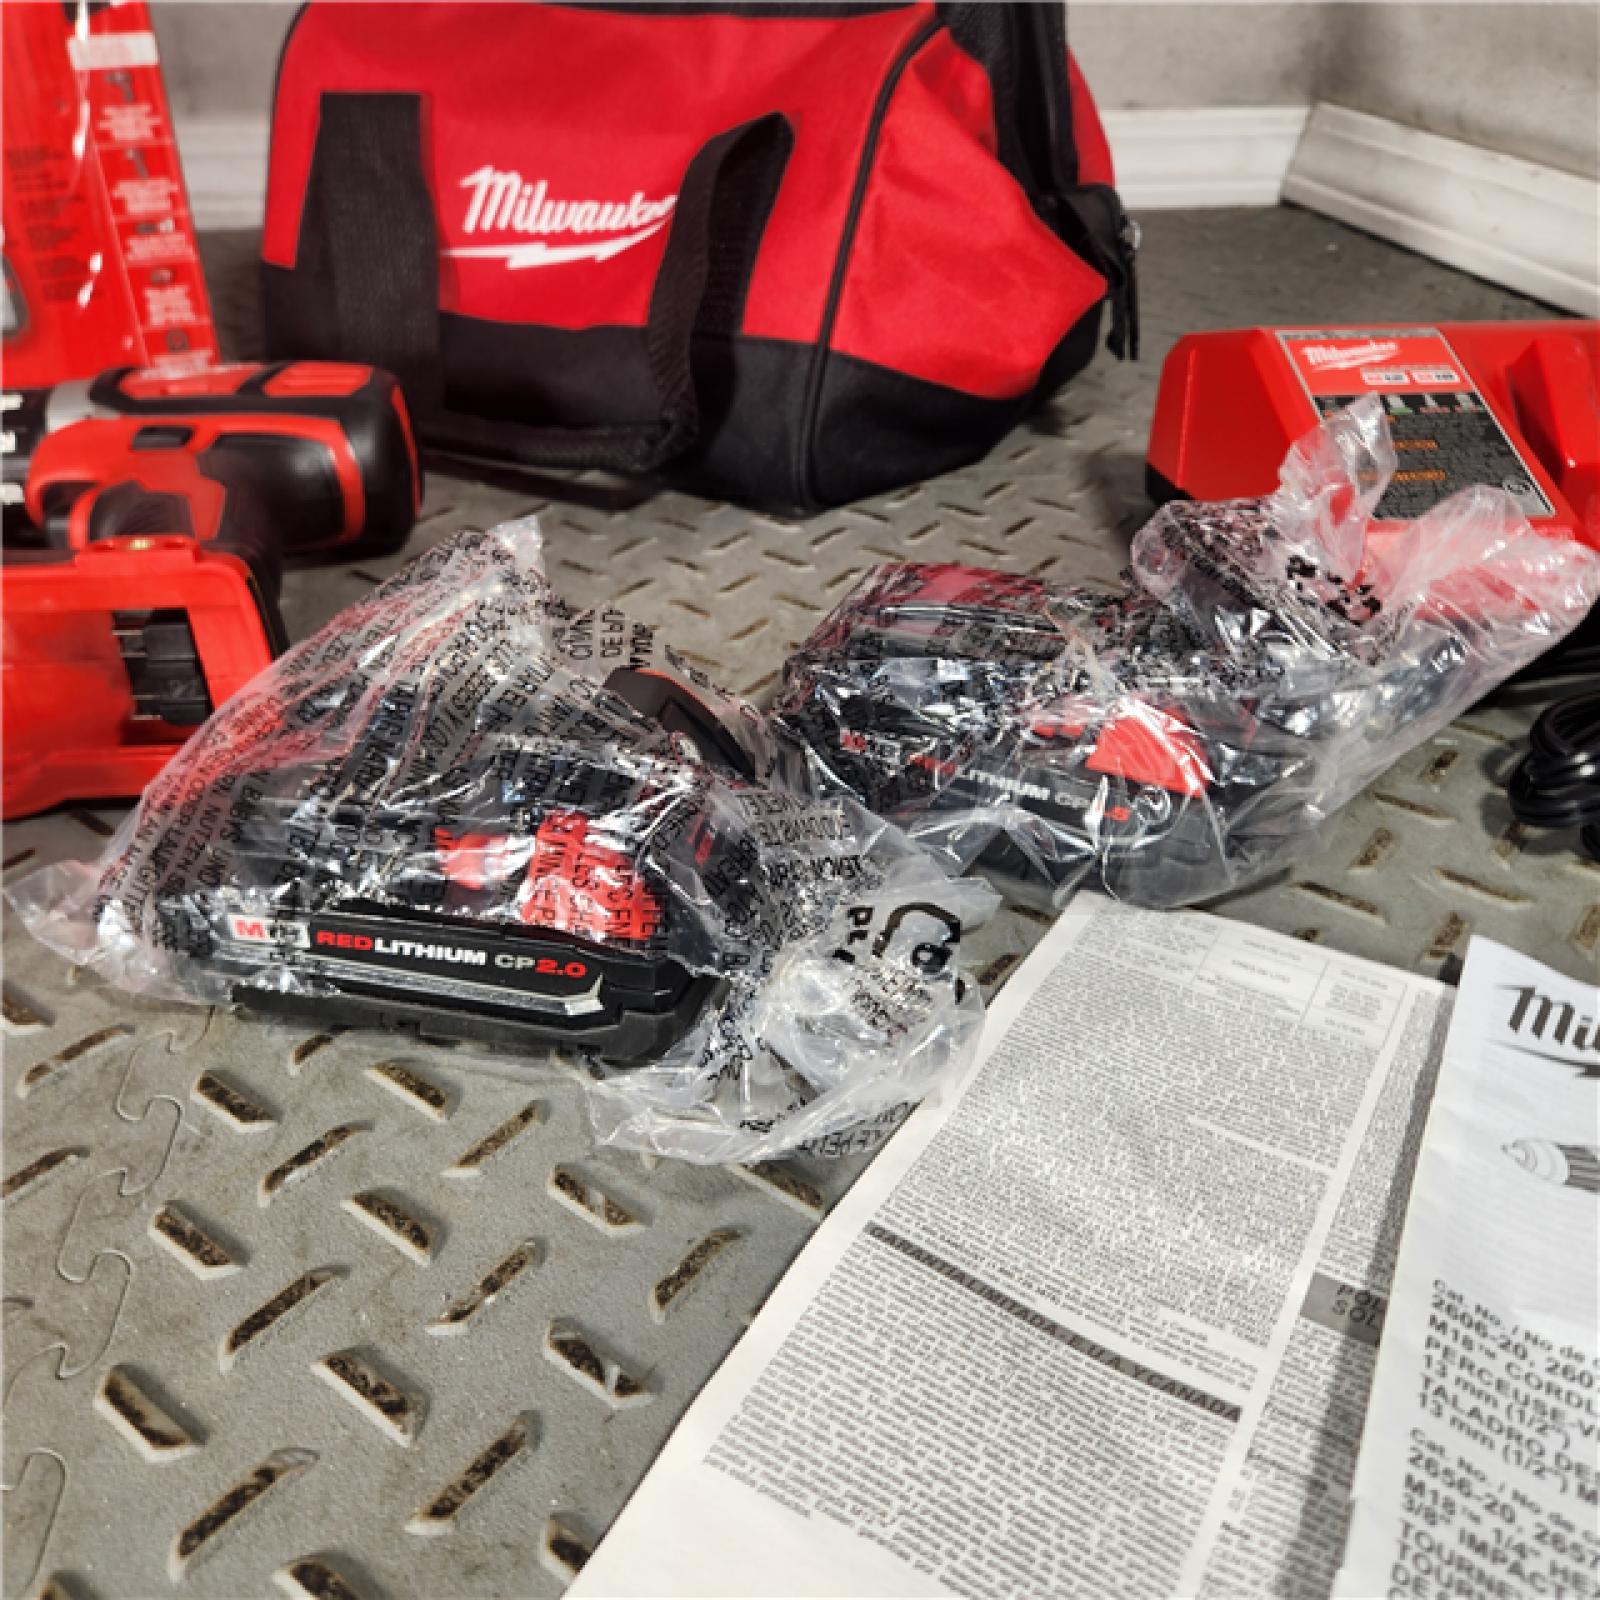 Houston Location - As-Is Milwaukee 2691-22 18V M18 Lithium-Ion Compact Brushless Cordless 2-Tool Combo Kit with 1/2 Drill/Driver and 1/4 Hex Impact Driver 2.0 Ah - Appears IN GOOD Condition